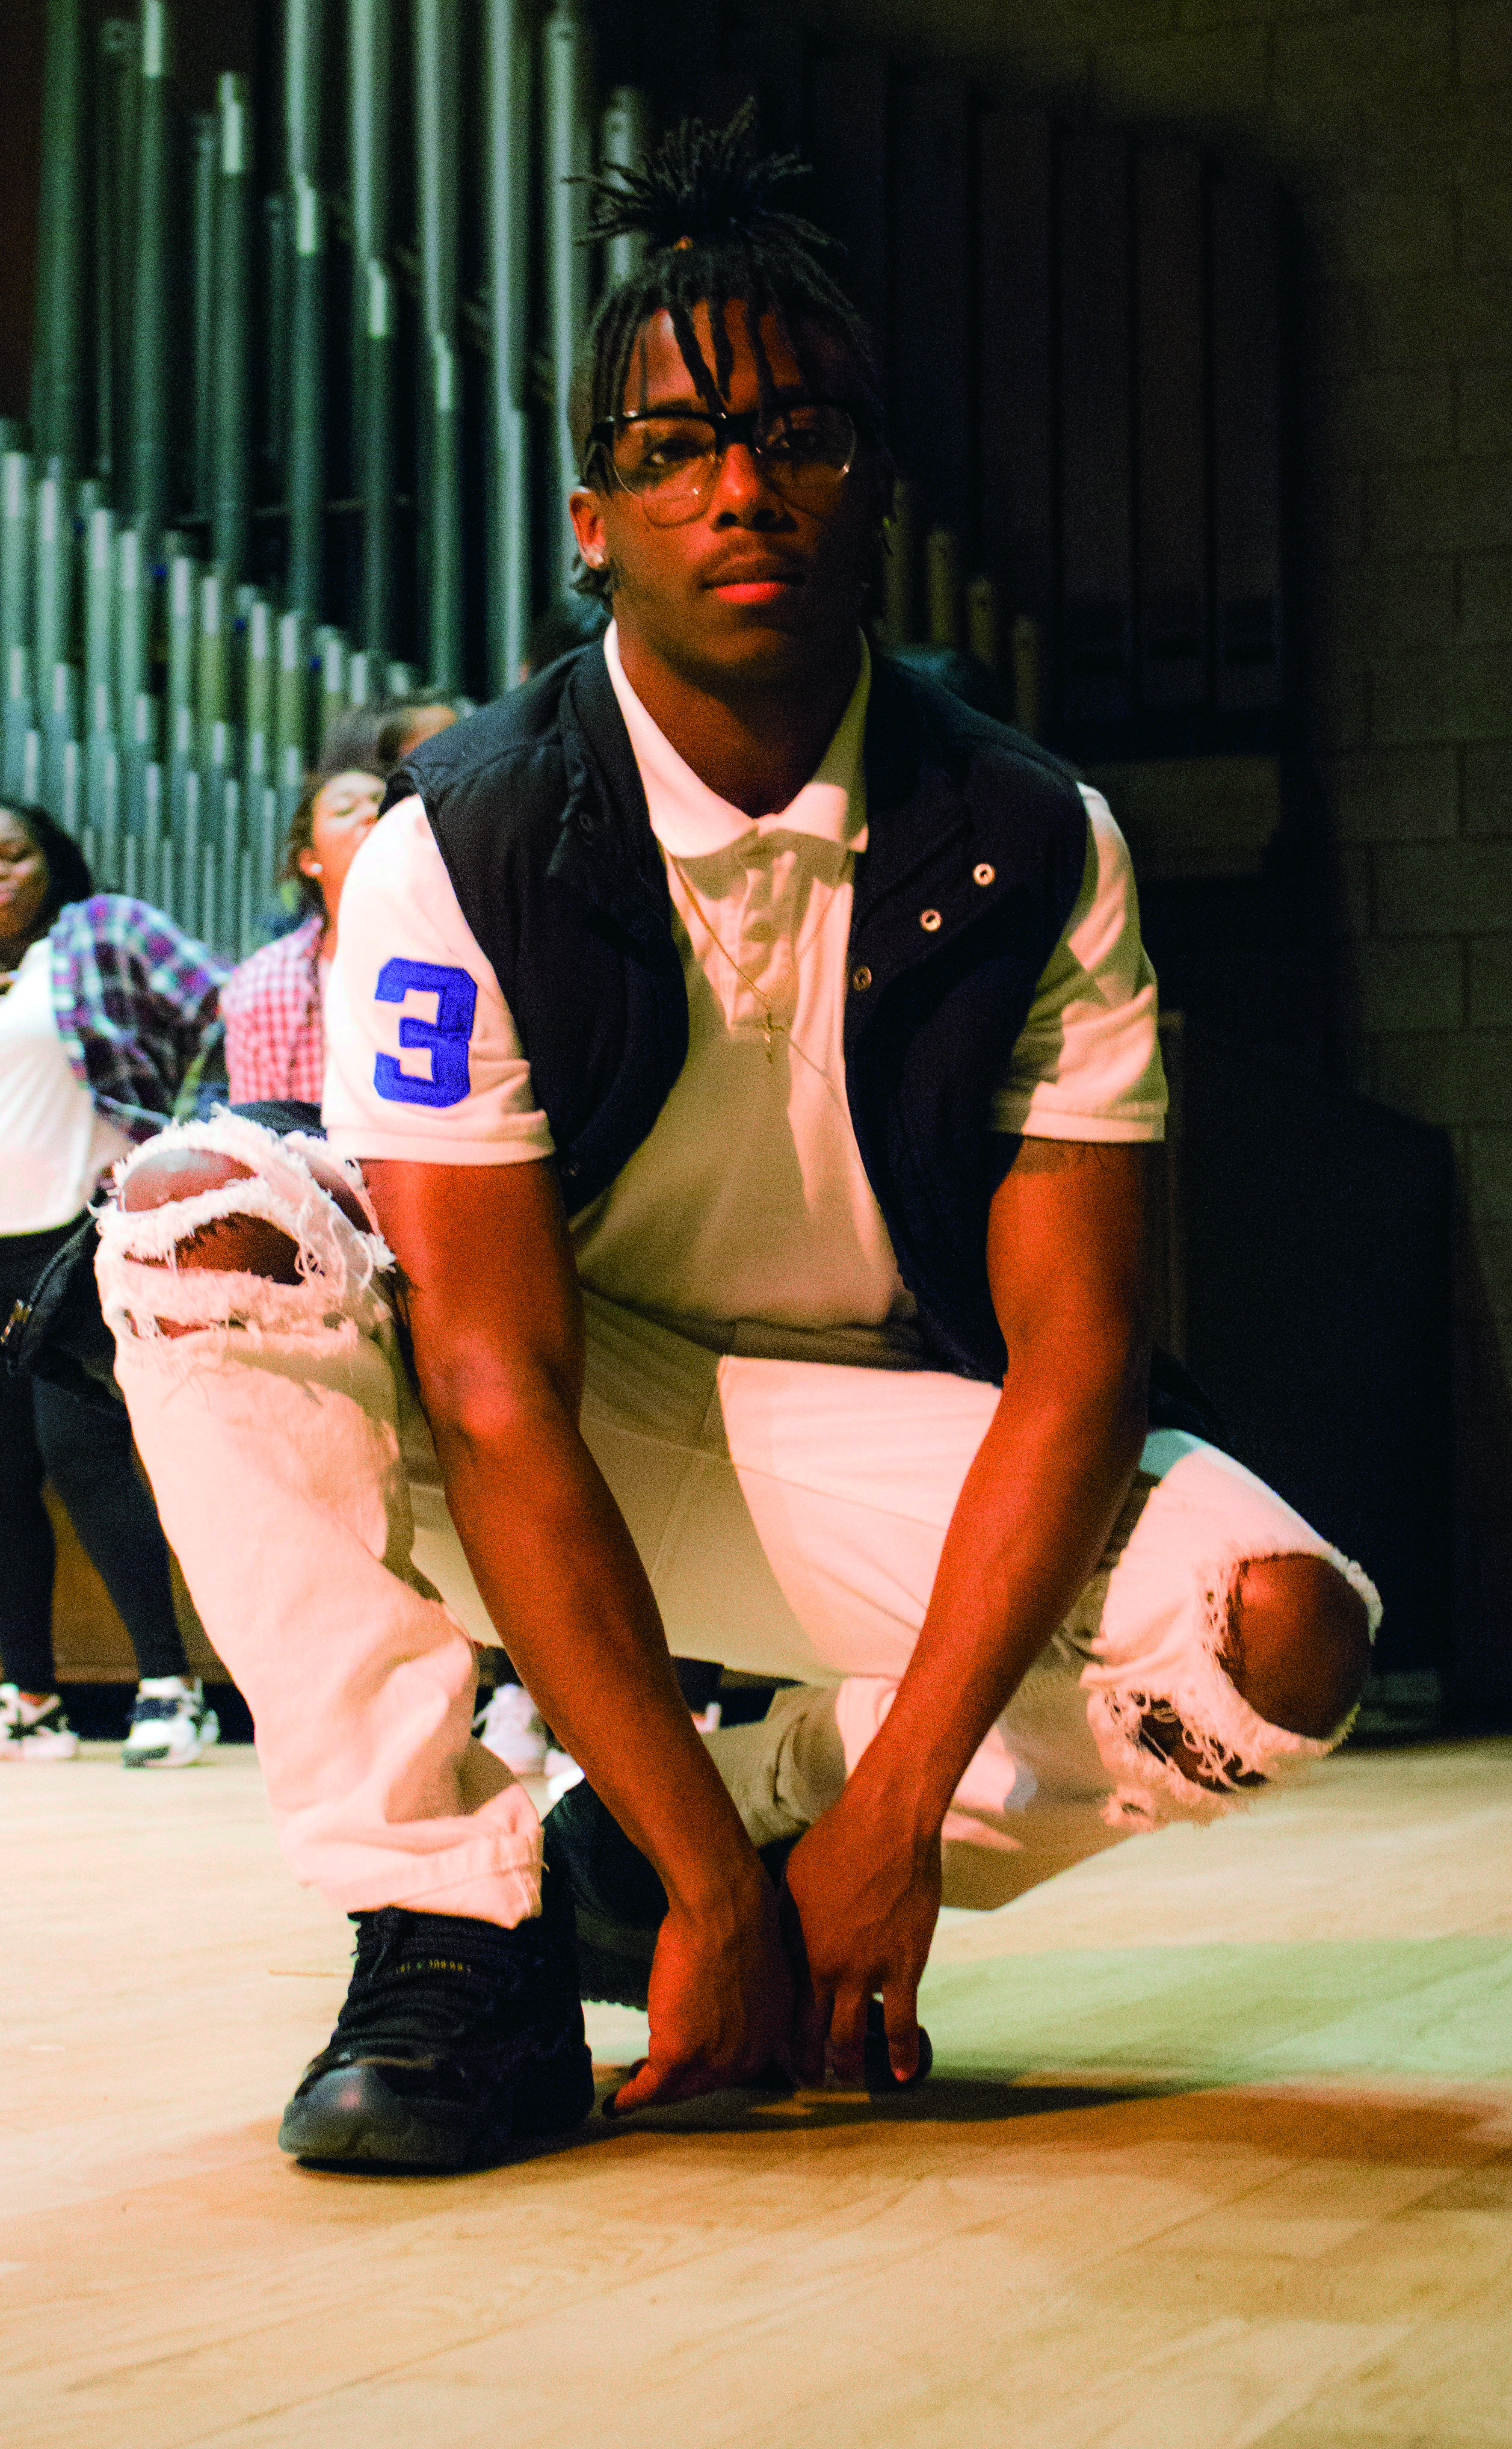 Zaylon Woolfork performed a hip-hop song for BSA’s annual Apollo Night on Feb. 9. Photo by David Peters.